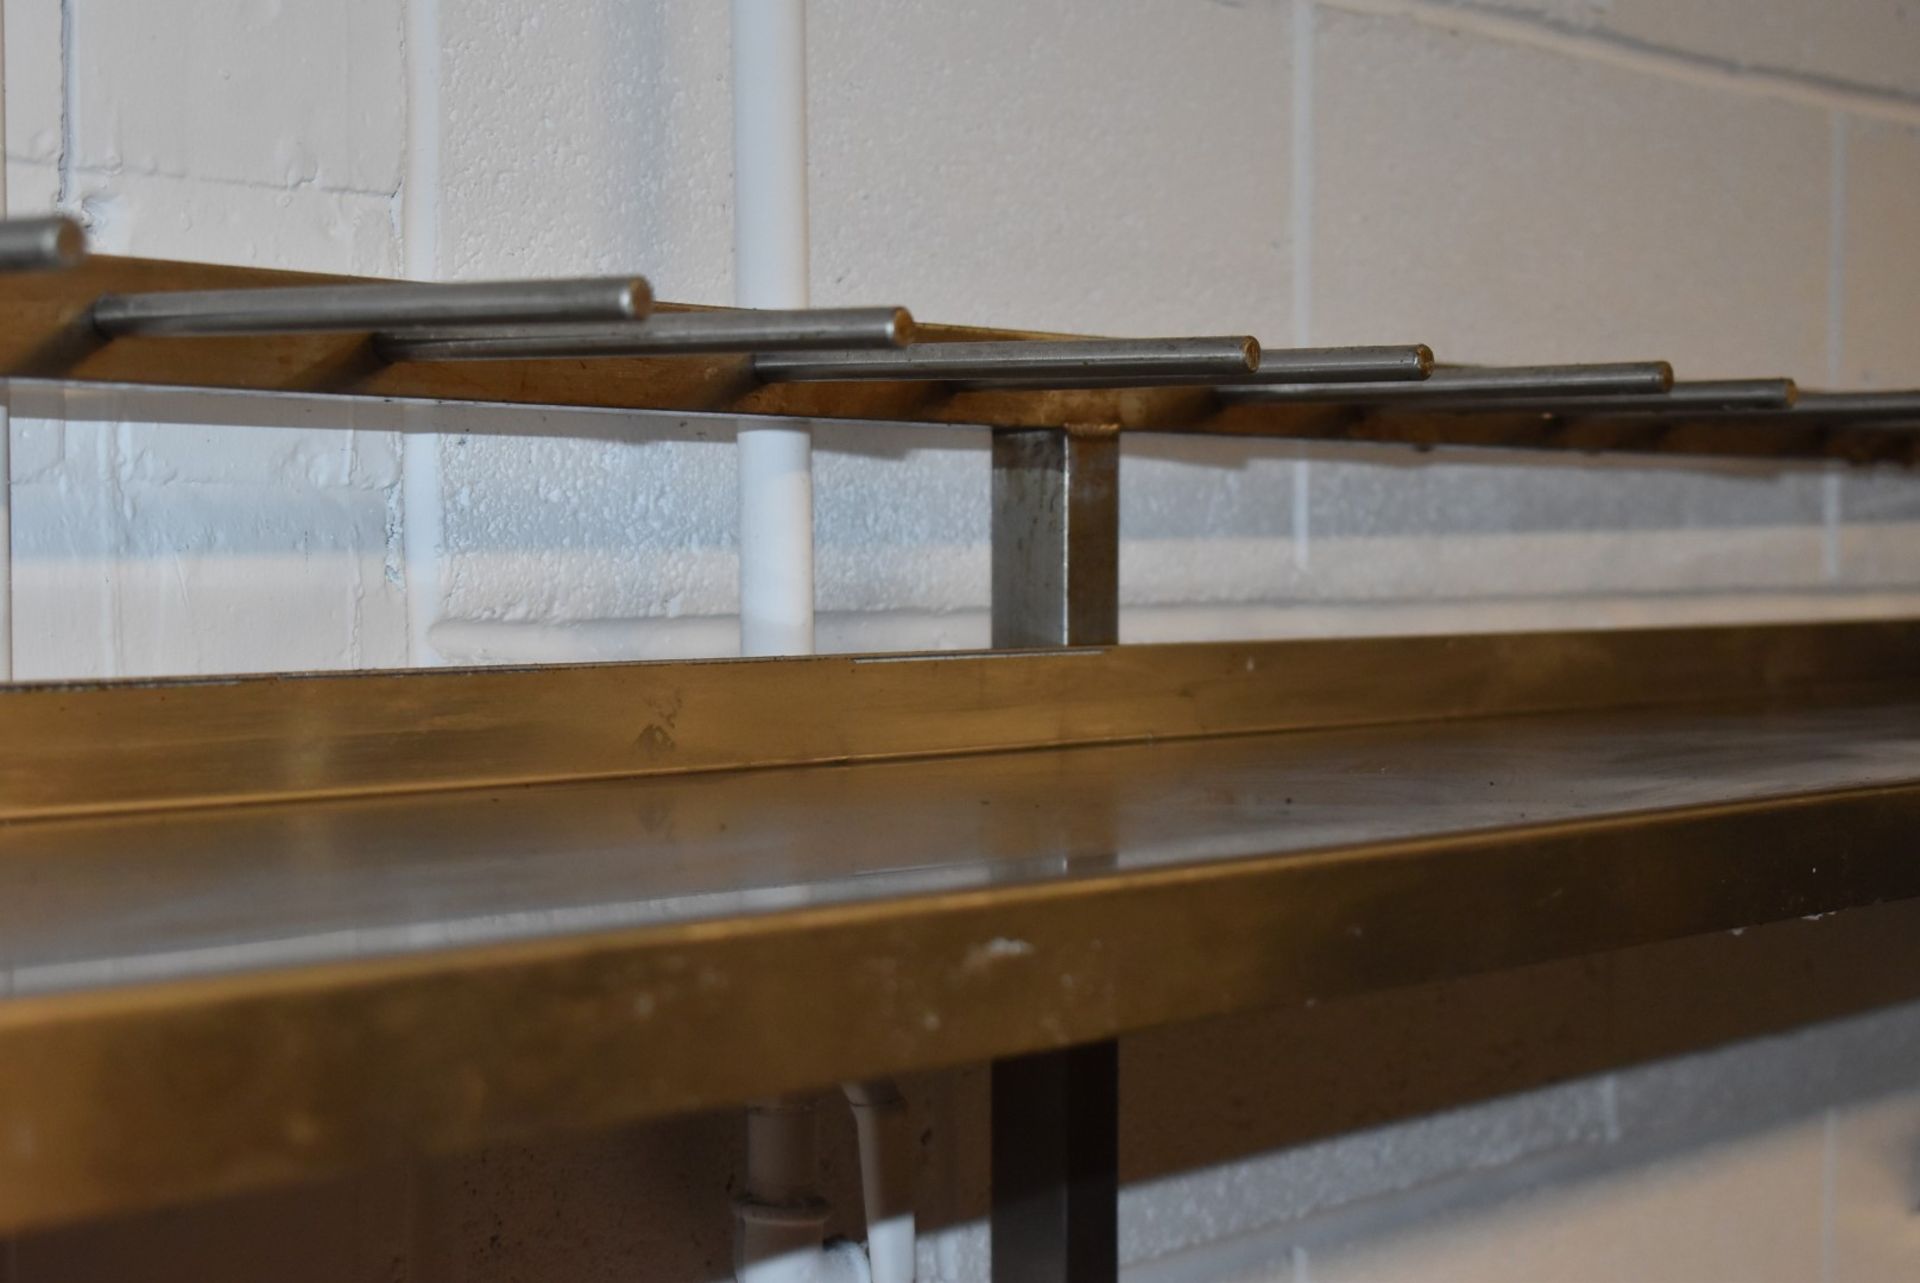 1 x Stainless Steel Donut Preperation Bench - Features Removable Undershelves, Castor Wheels and - Image 11 of 11